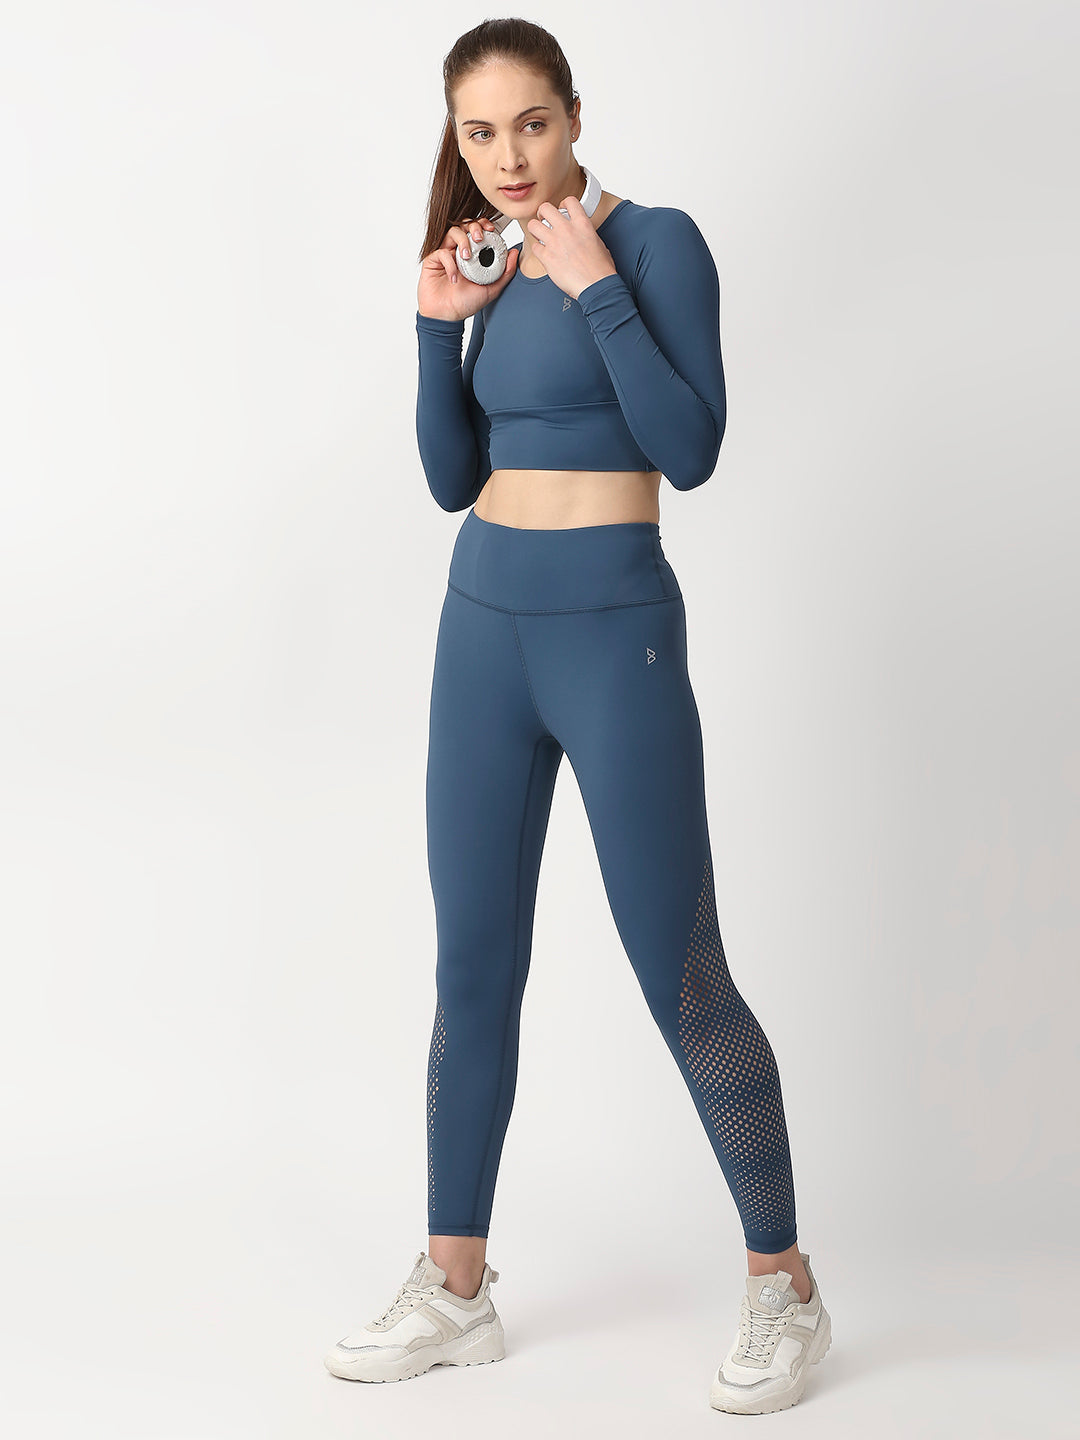 Crystal Teal Cut Out Leggings boddactive.com